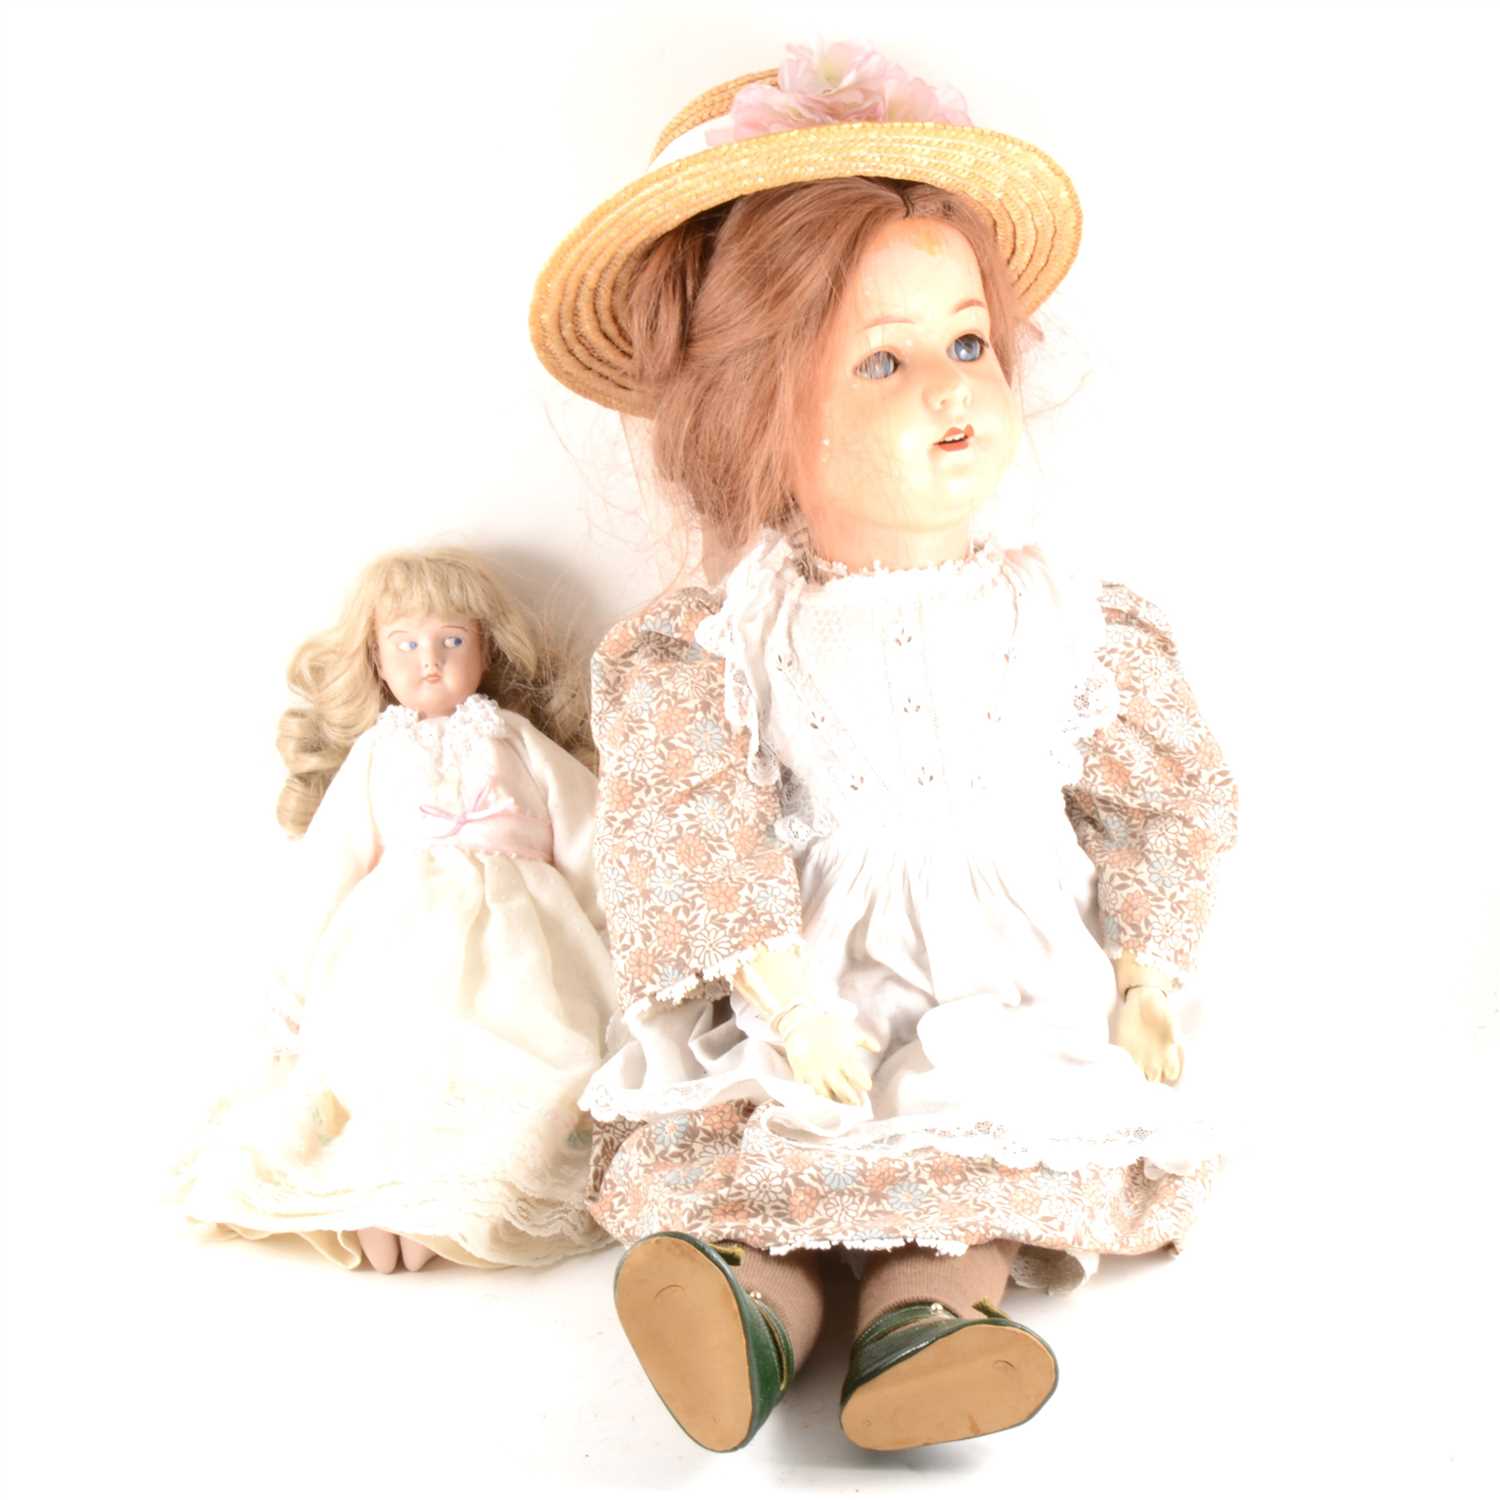 Lot 109 - An early 20th Century composition head doll by Heubach Koppelsdorf, and a modern doll.